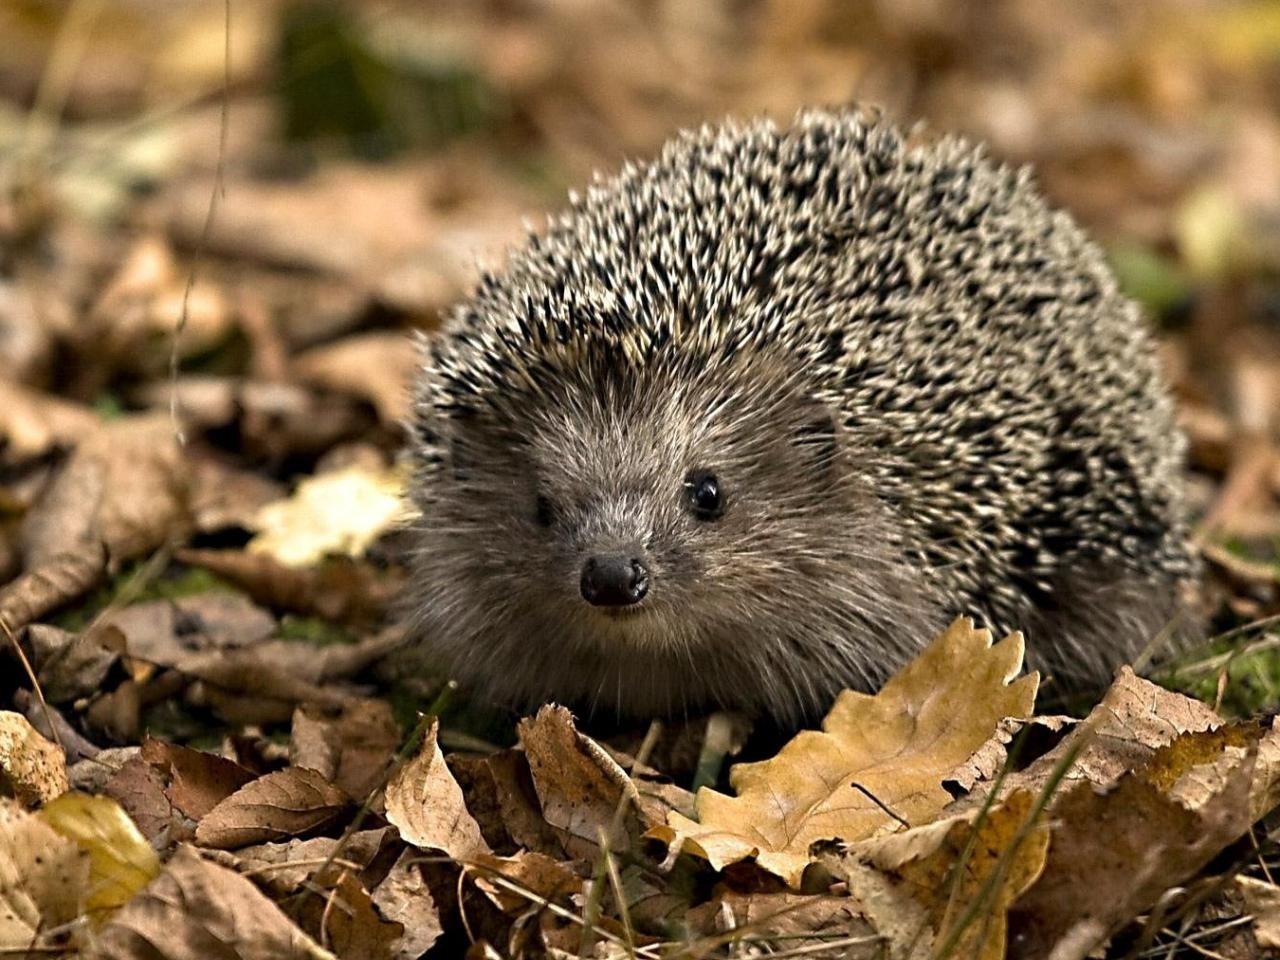 26741 download wallpaper animals, hedgehogs, orange screensavers and pictures for free